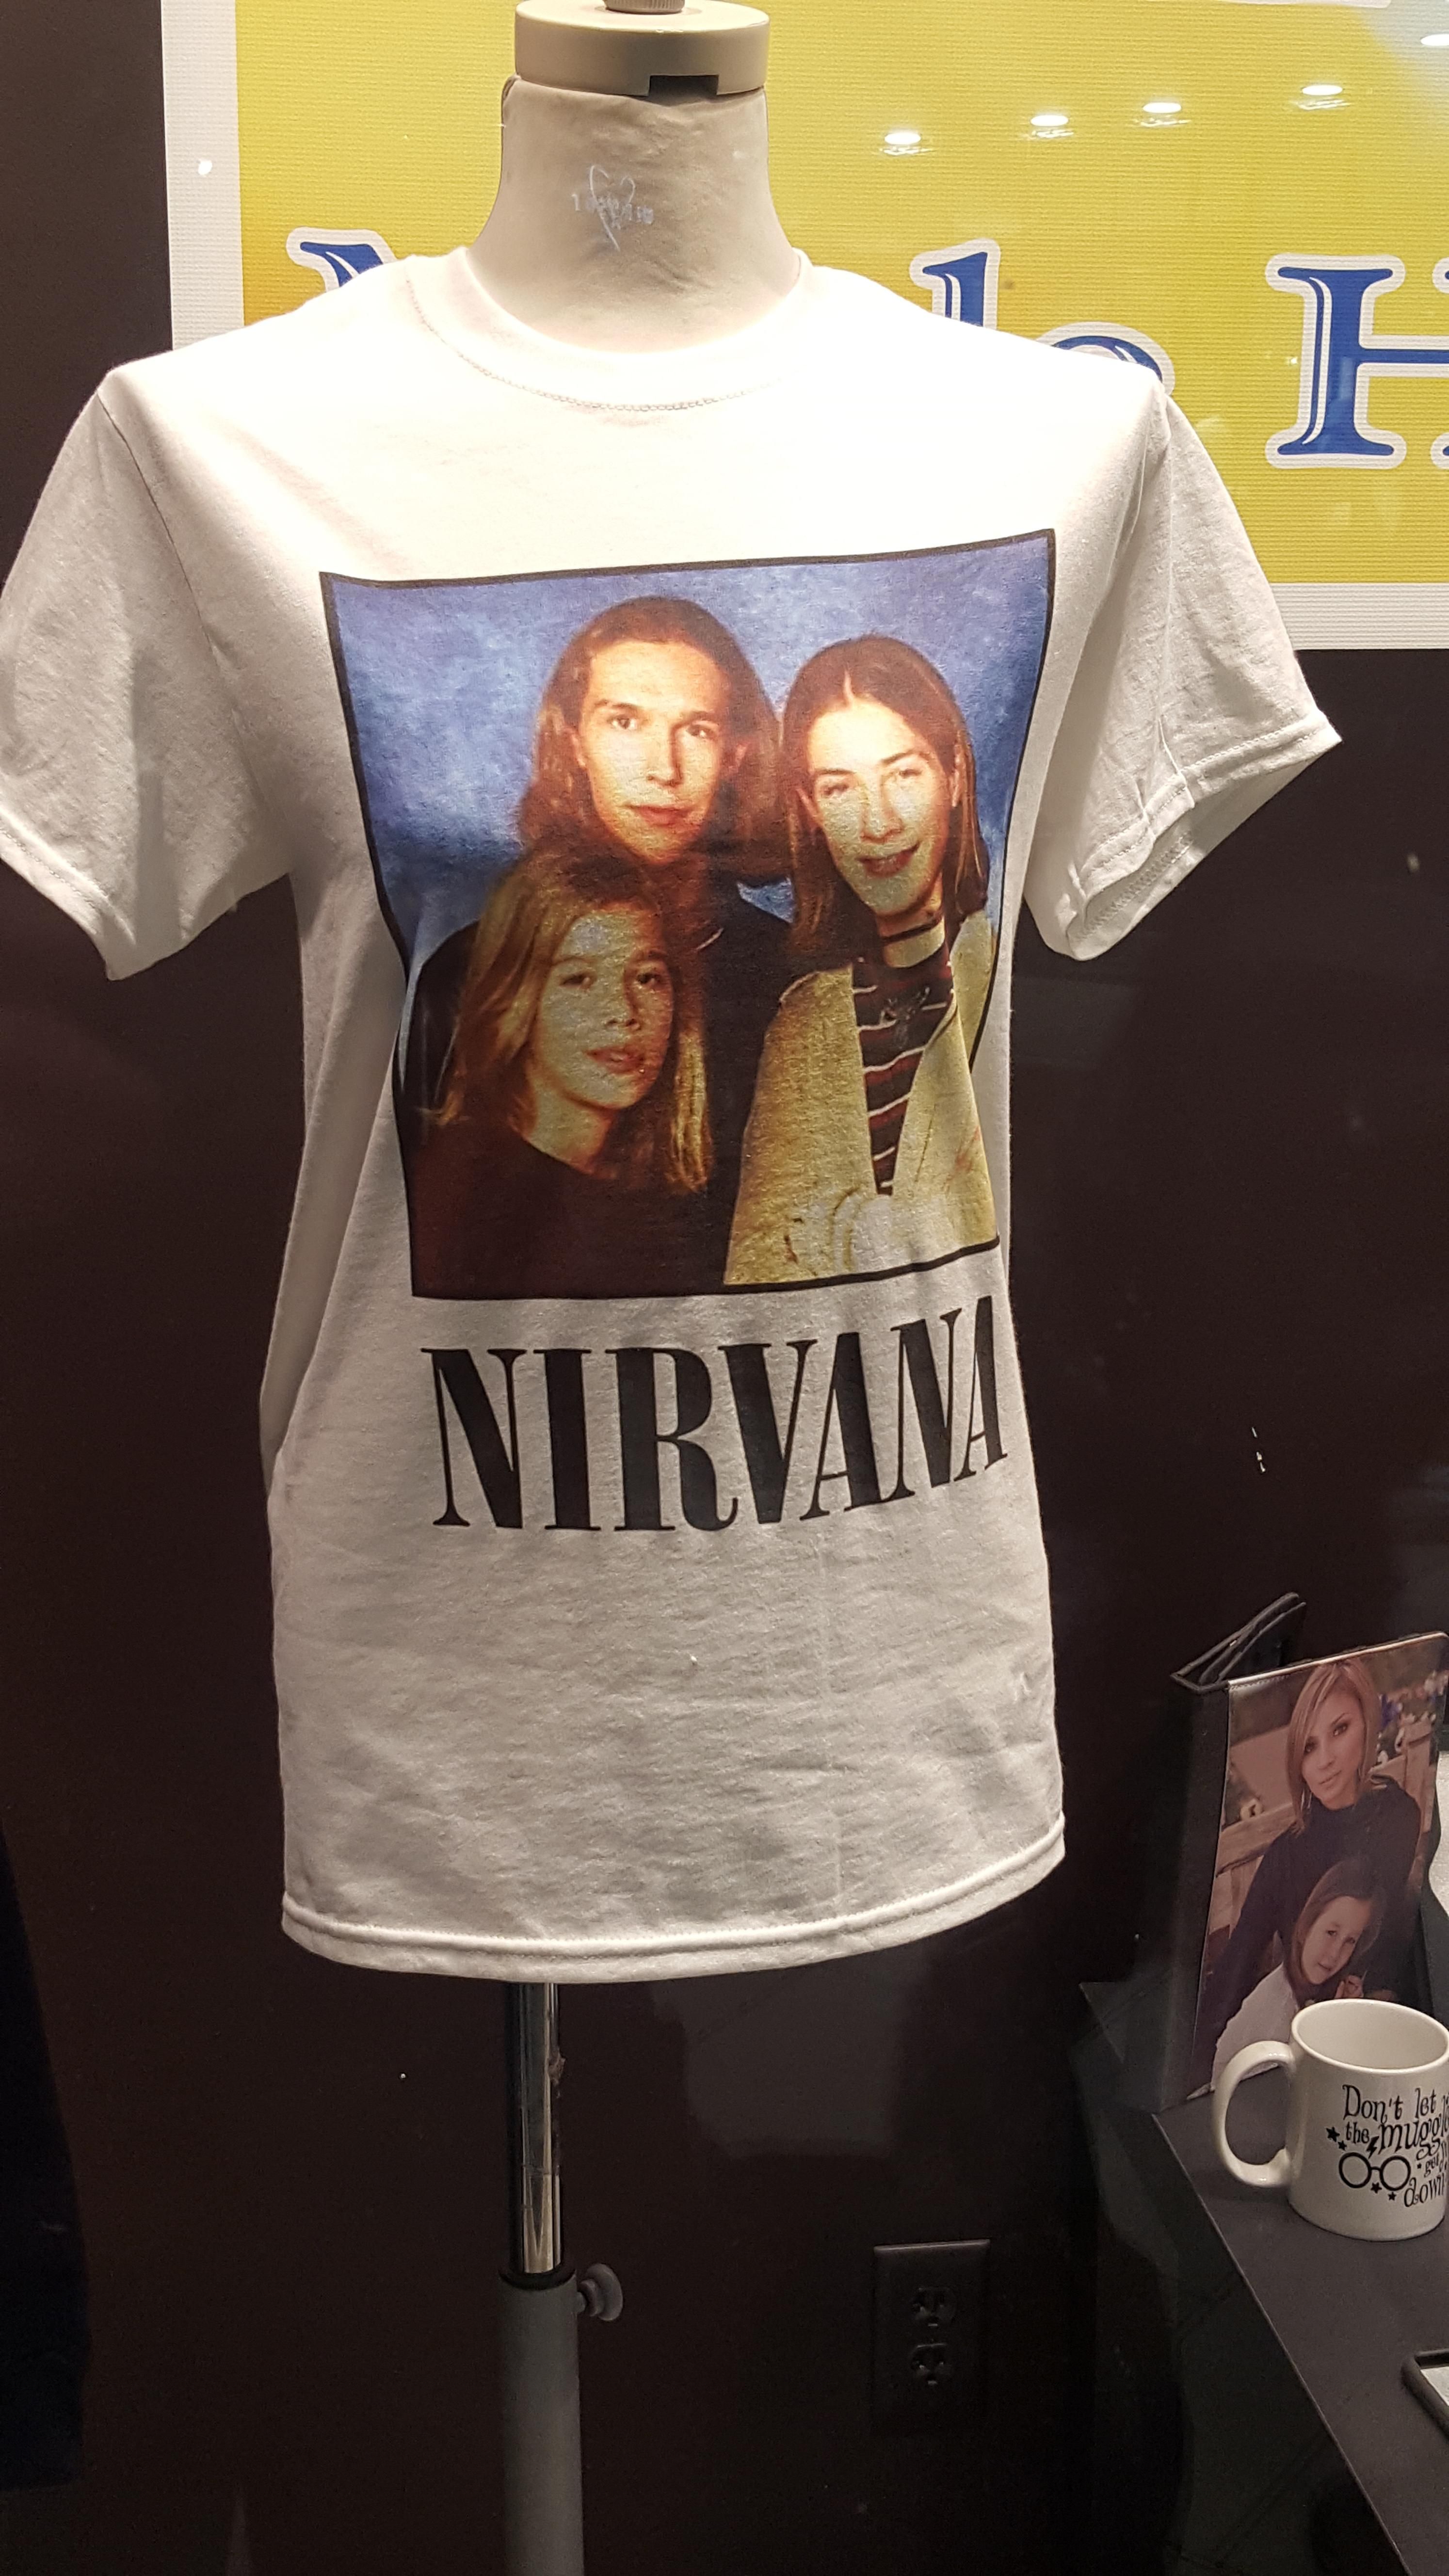 Daughter asked for "old band" t-shirts for Christmas. She doesn't even know any old bands. This looks perfect